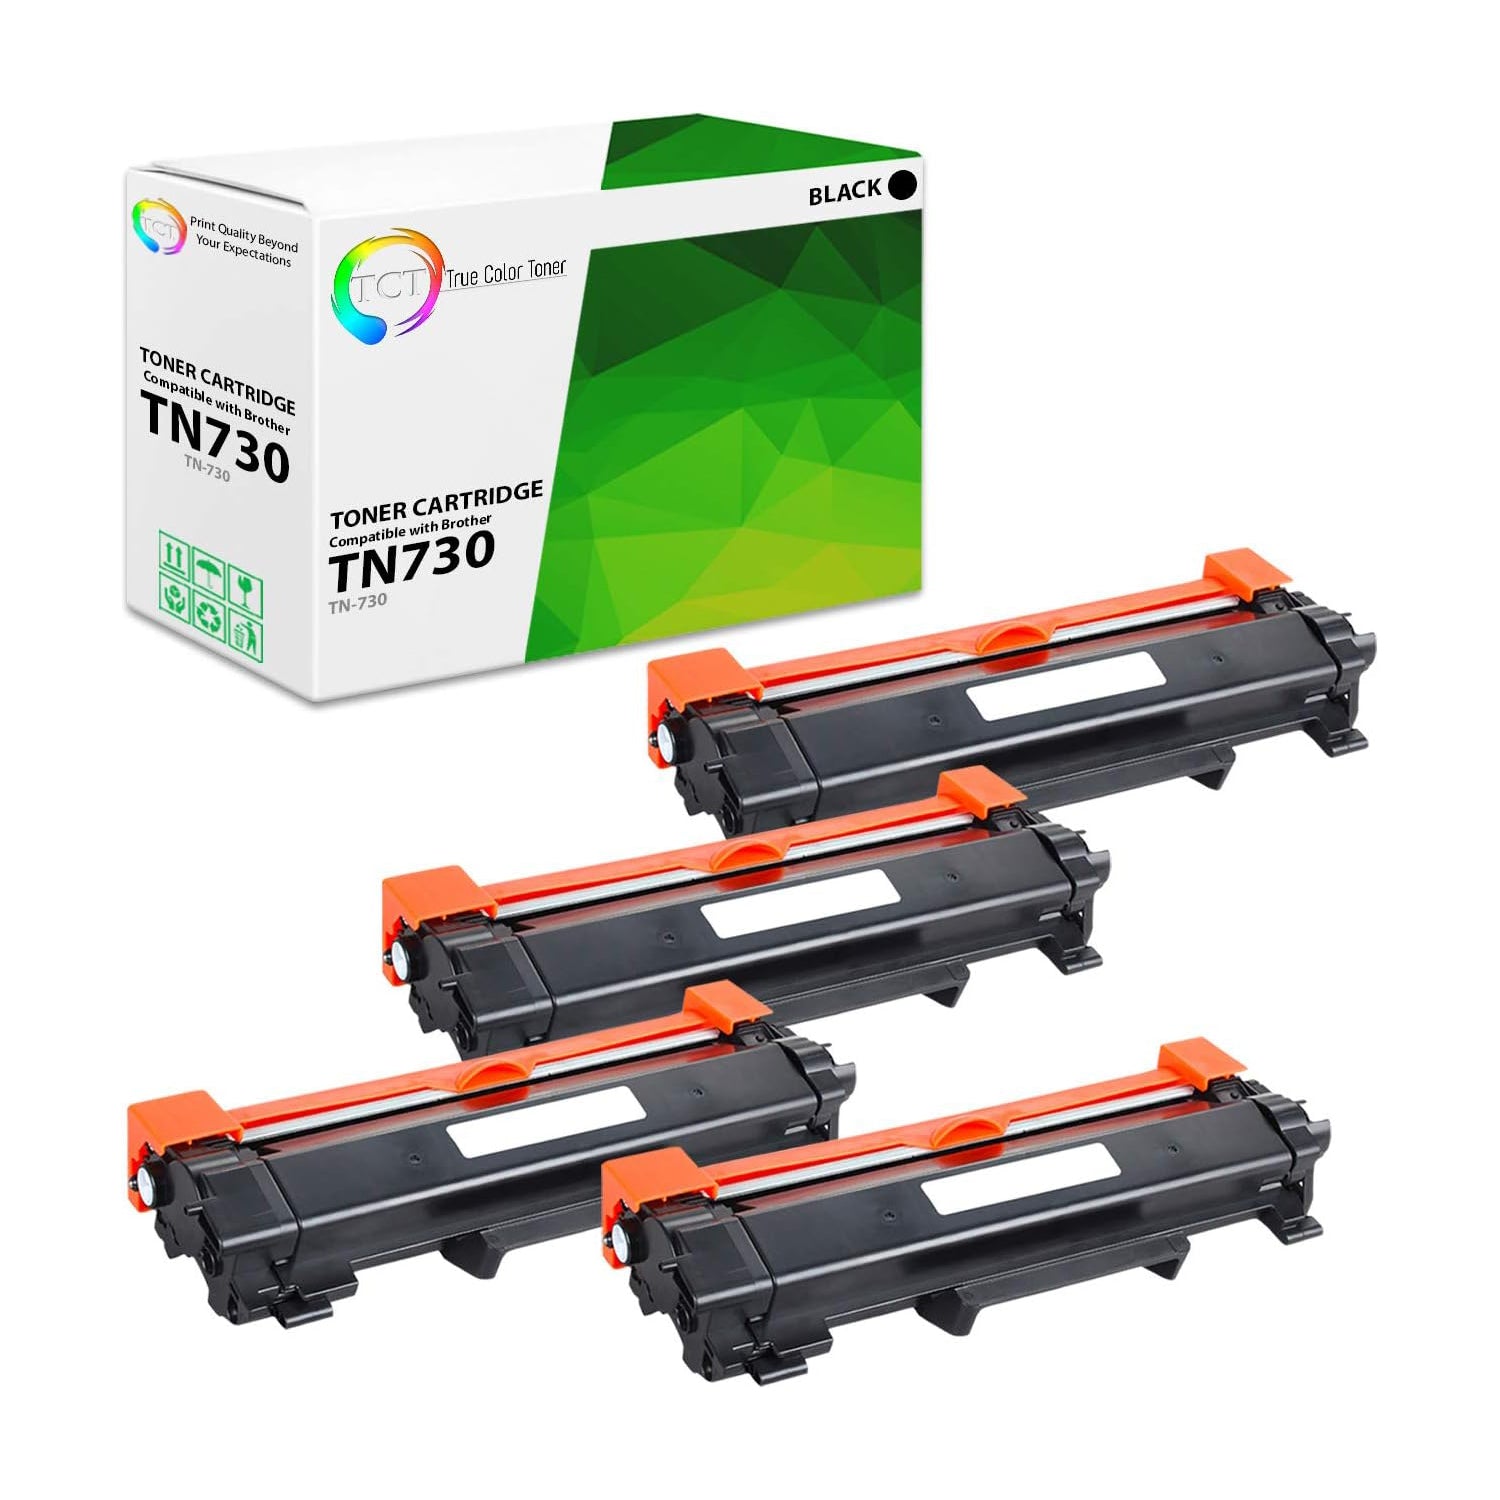 TCT Compatible Toner Cartridge Replacement for the Brother TN730 Series - 4 Pack Black